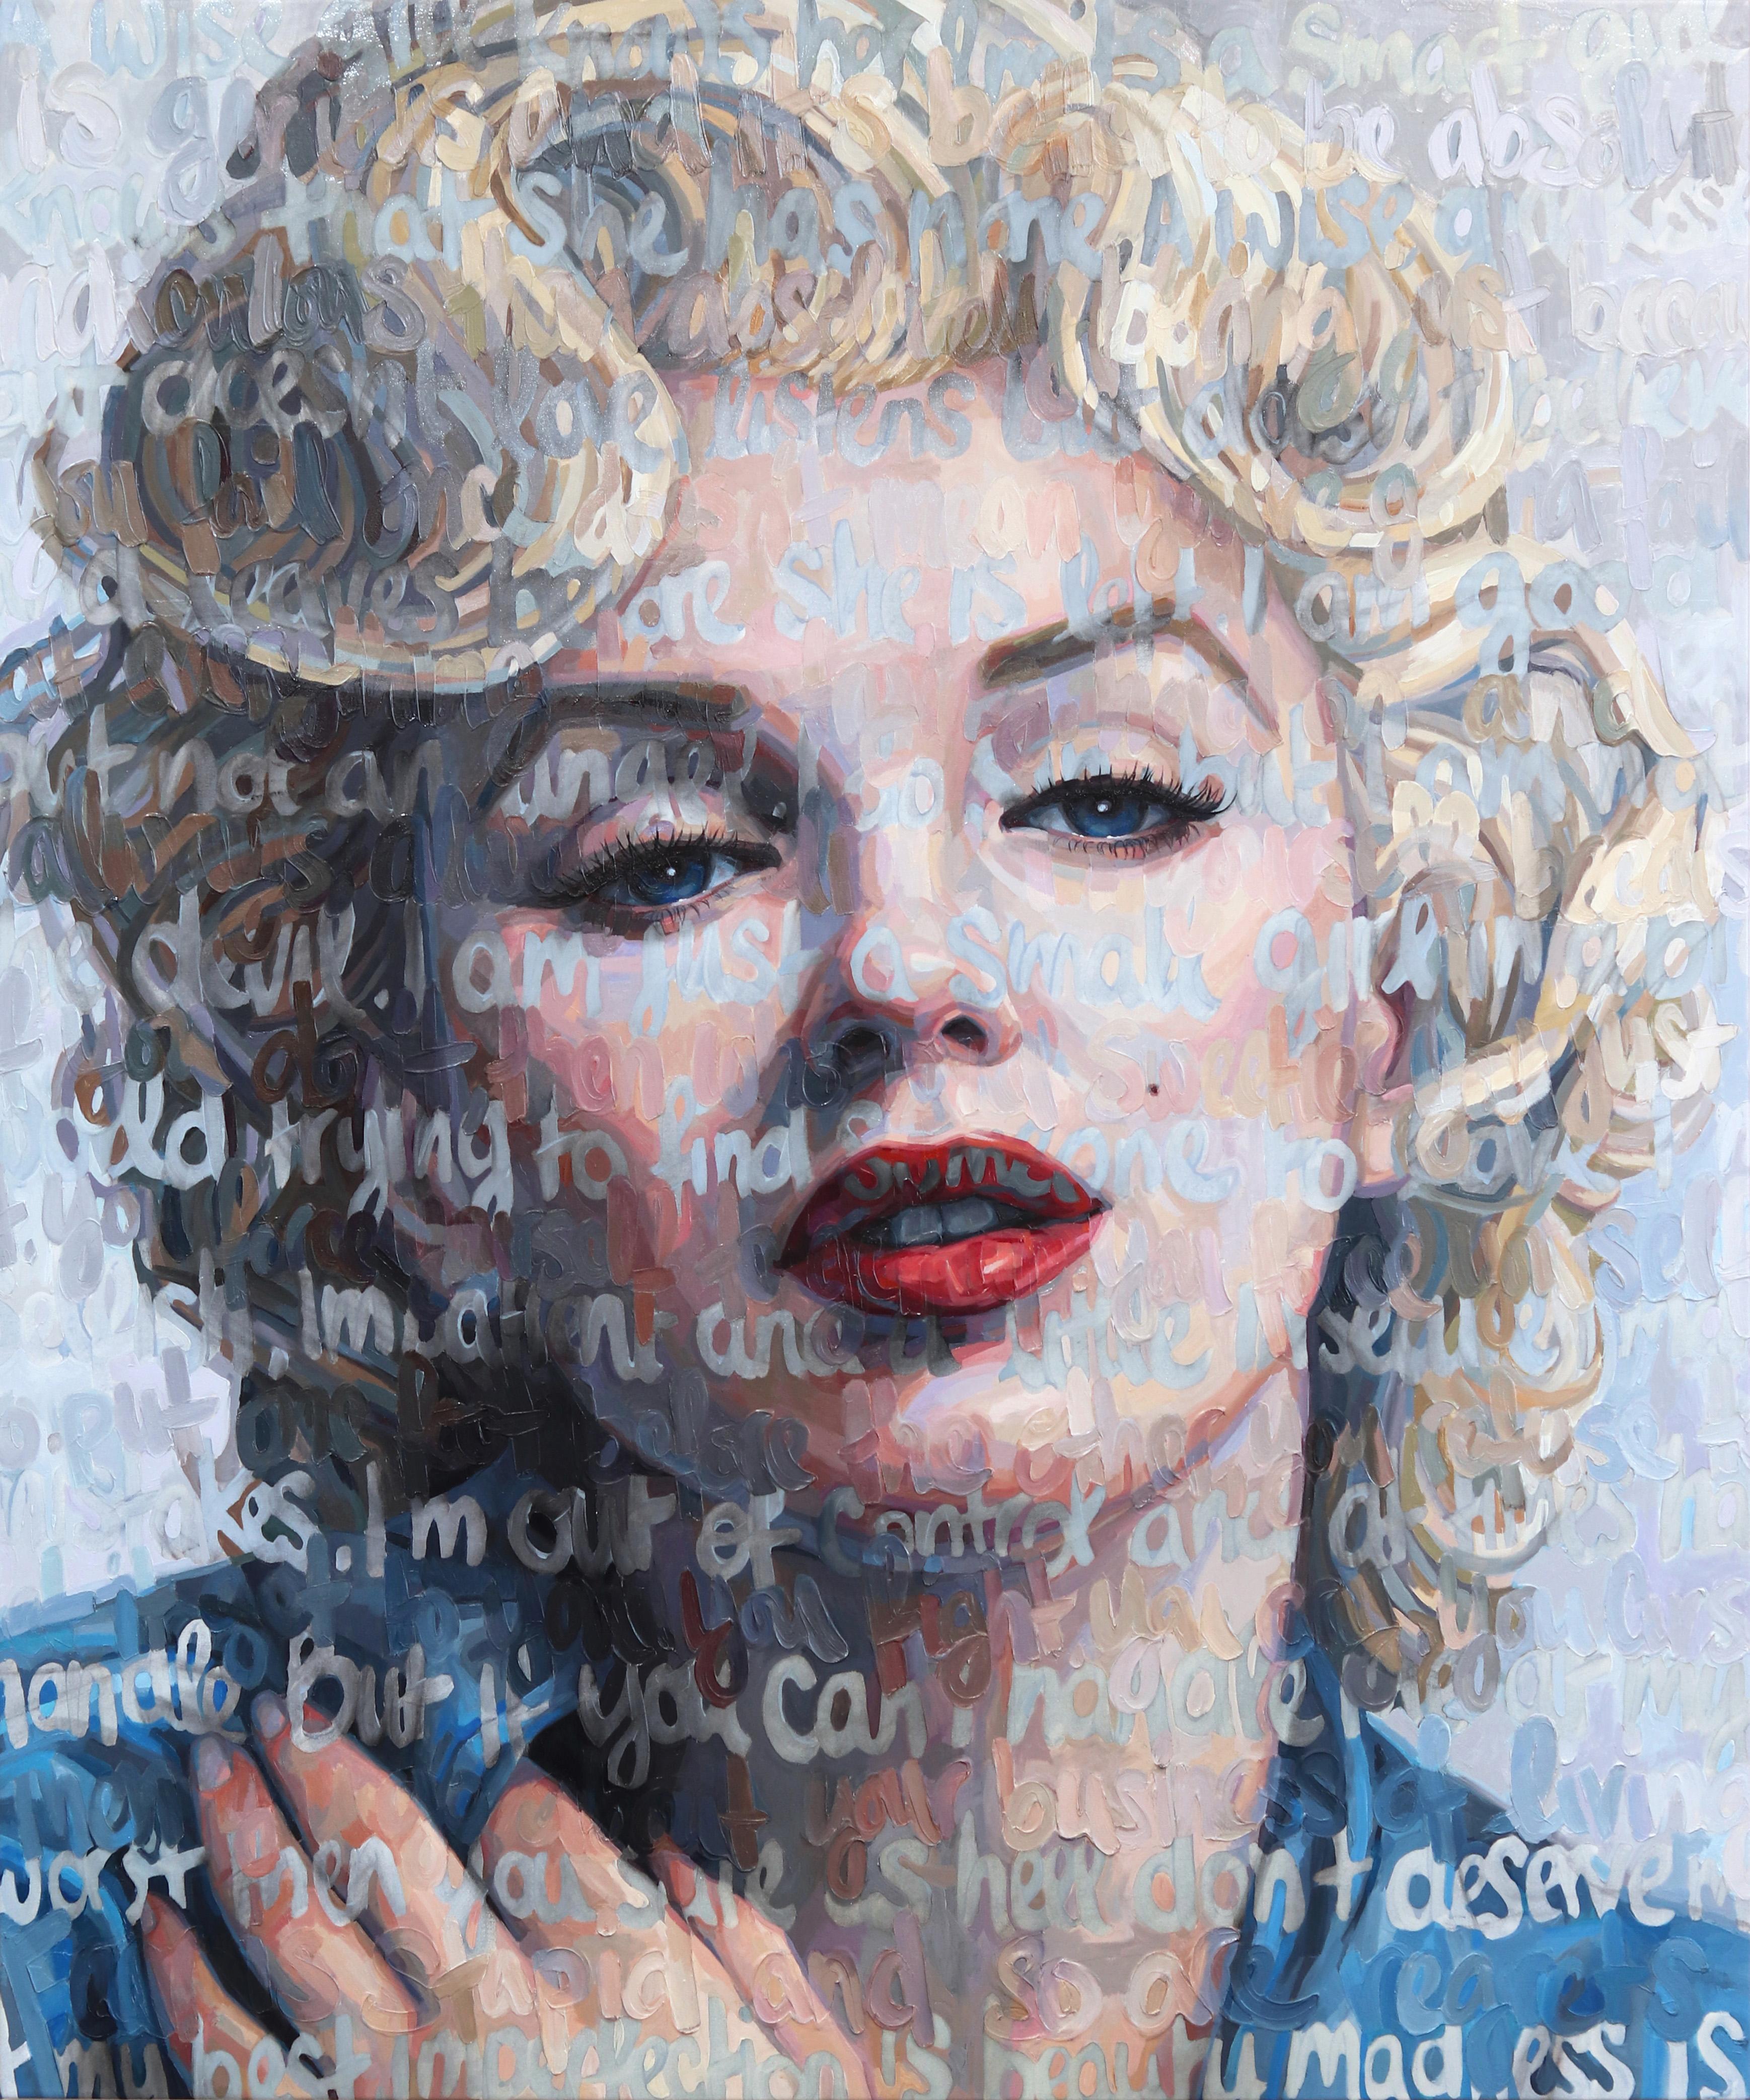 Christina Major Figurative Painting - Marilyn "A Wise Girl" Large Original Marilyn Monroe Textural Oil Painting